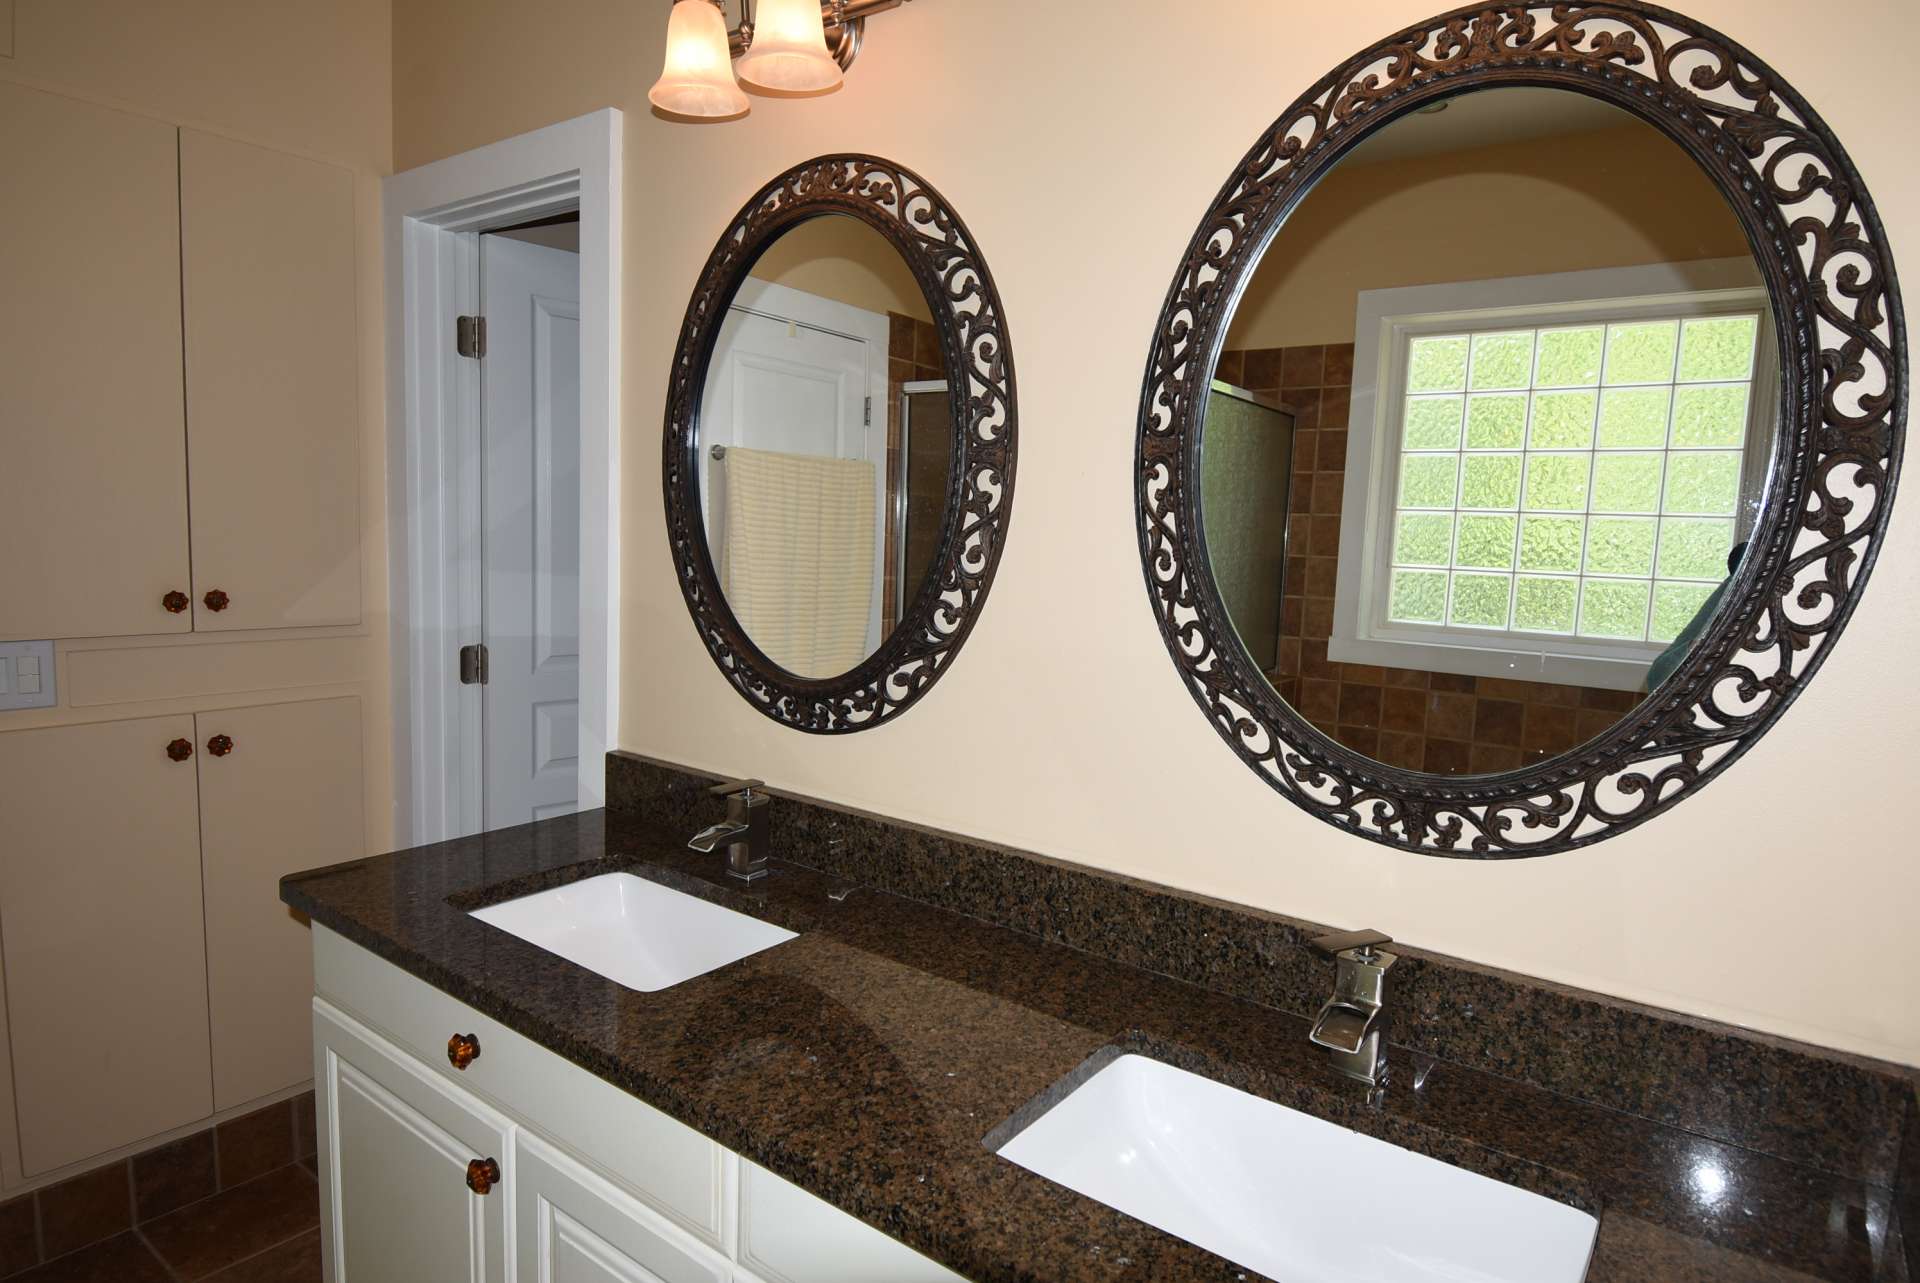 The private master bath offers a luxurious retreat. Features include a double vanity with granite counter, garden tub, and separate walk-in shower.